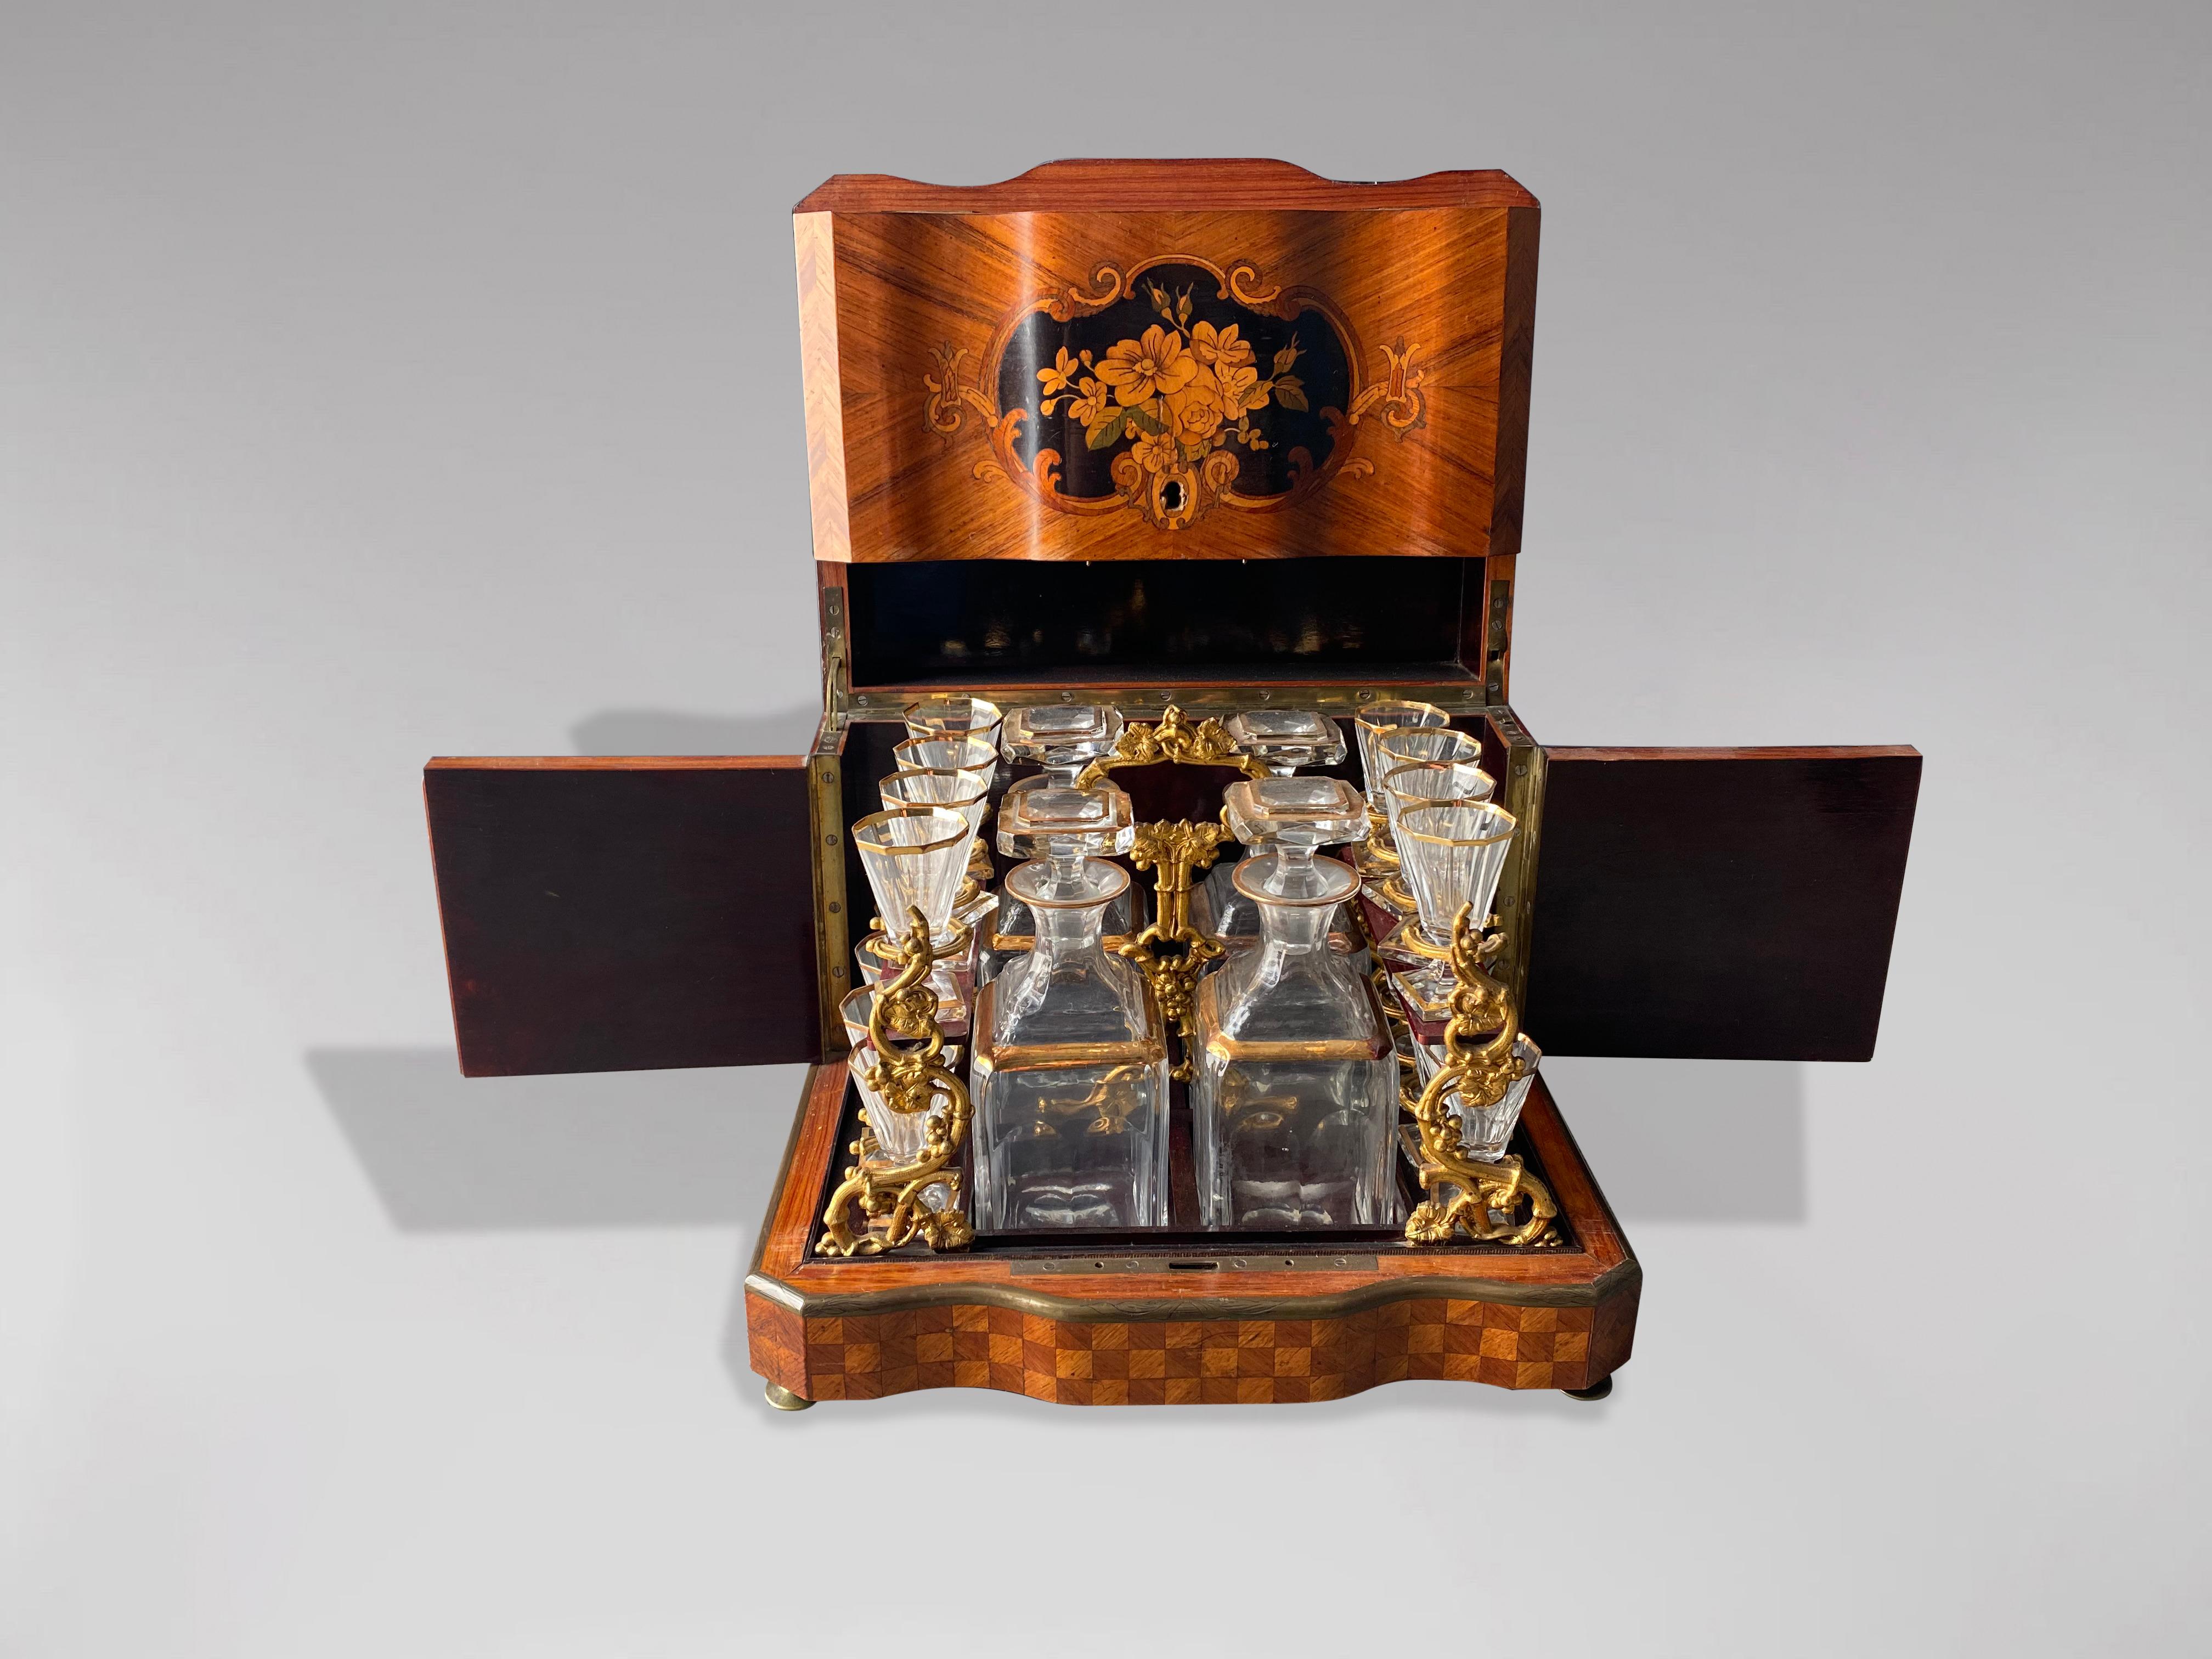 A Mid-19th Century Napoleon III period twenty piece French liquor cellar with Baccarat crystal attributed partial gilt glass barware, Paris, France, mid 19th century. The magnificent classical French Cave à Liqueur Set is of the finest master